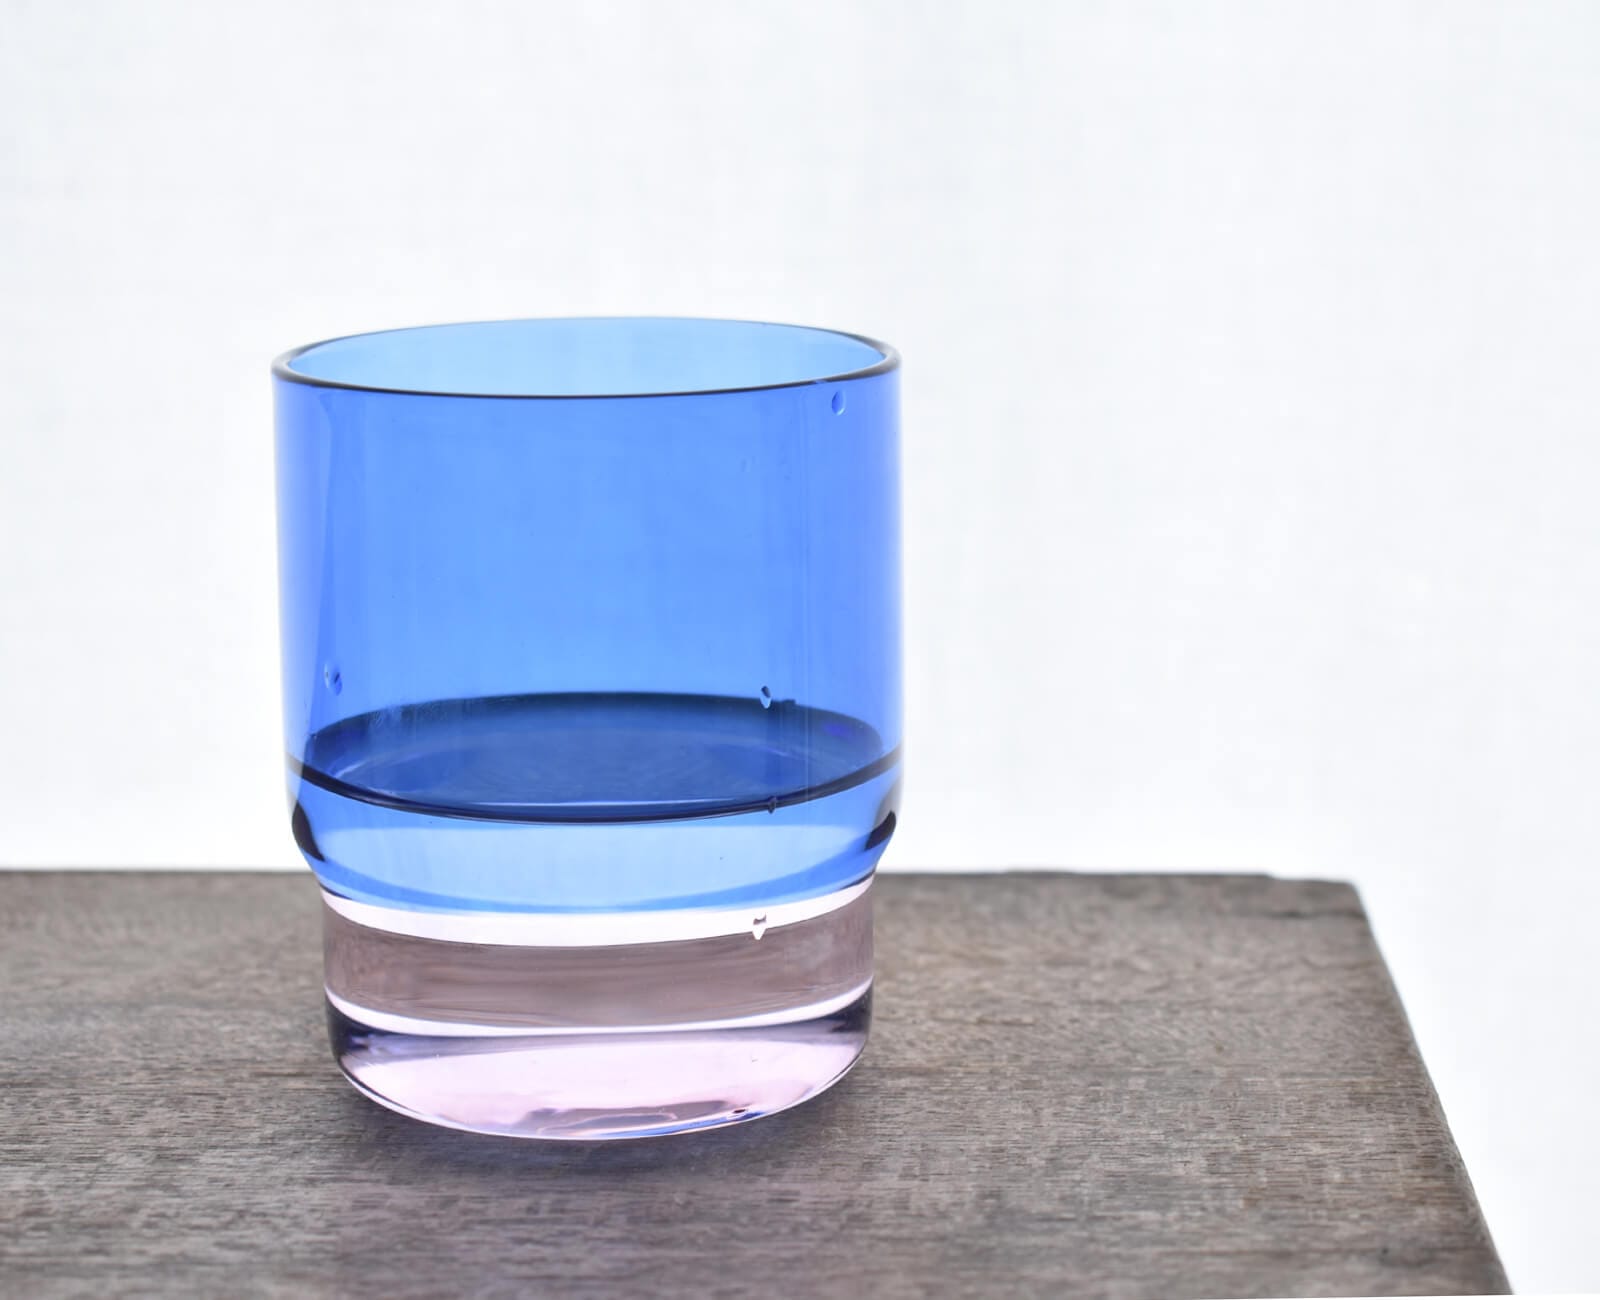 TWO TONE STACKING CUP